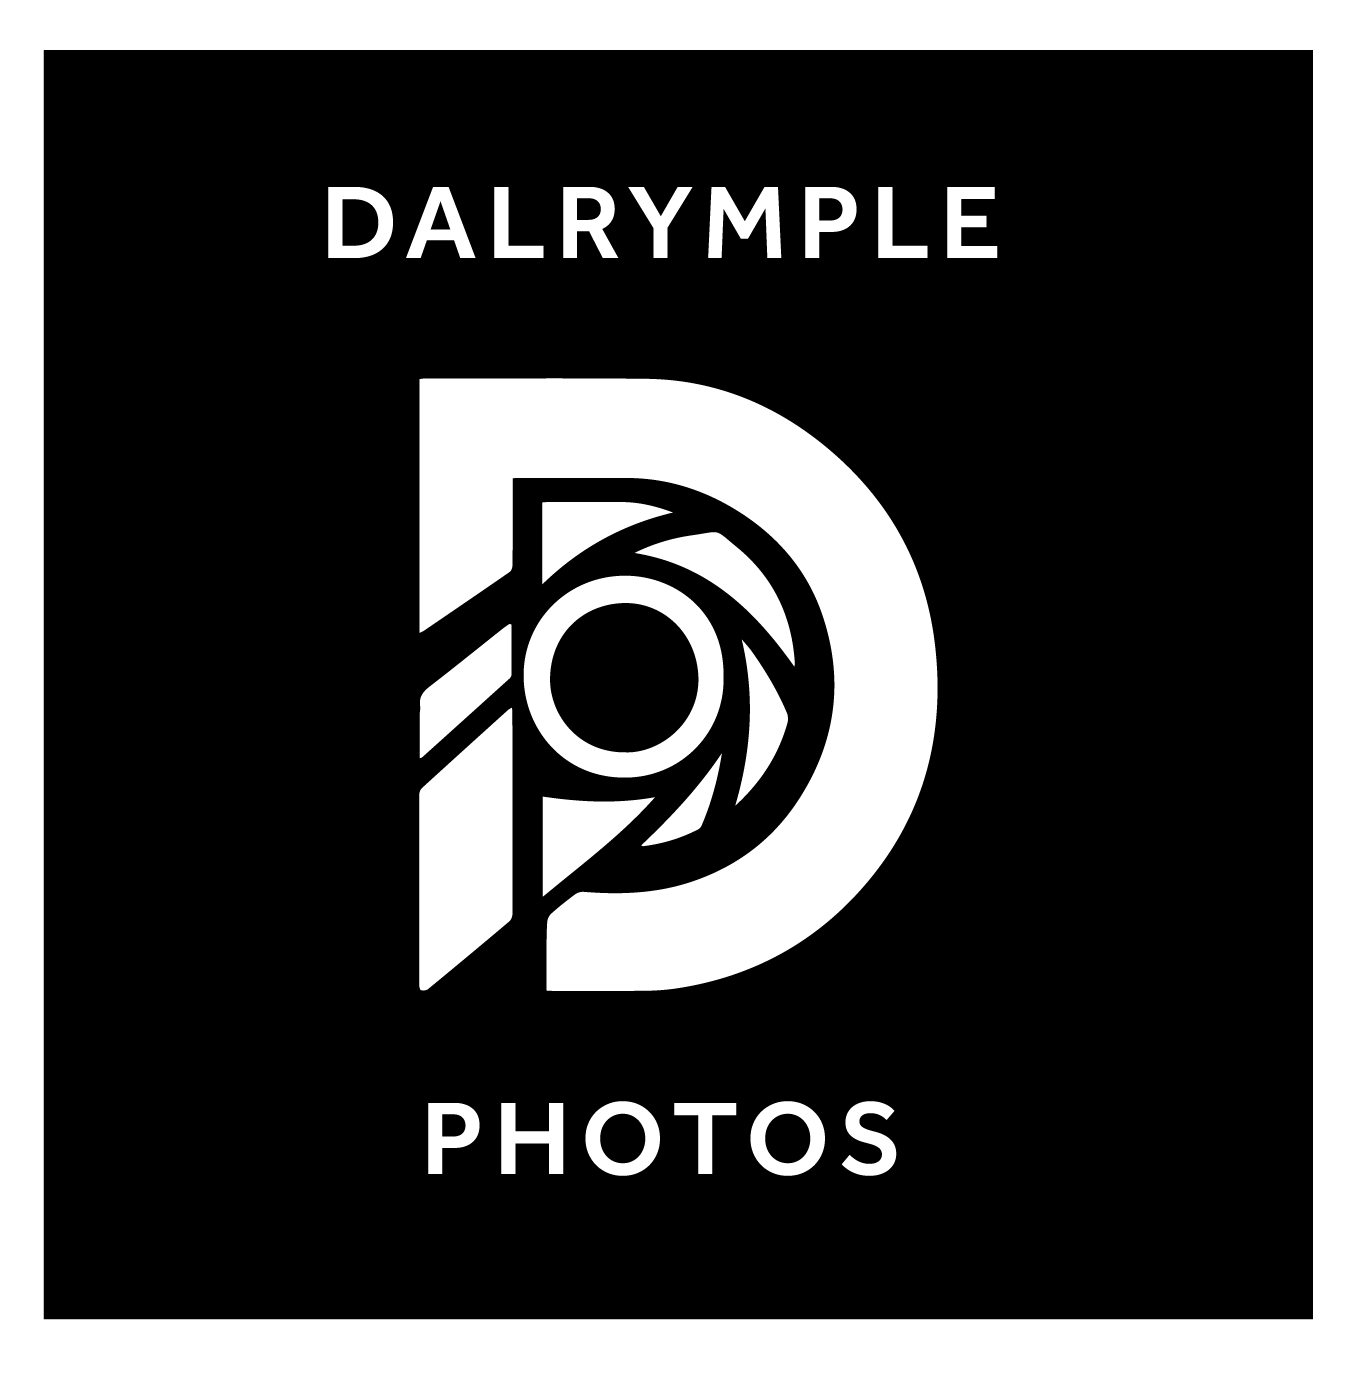 Dalrymple Photography